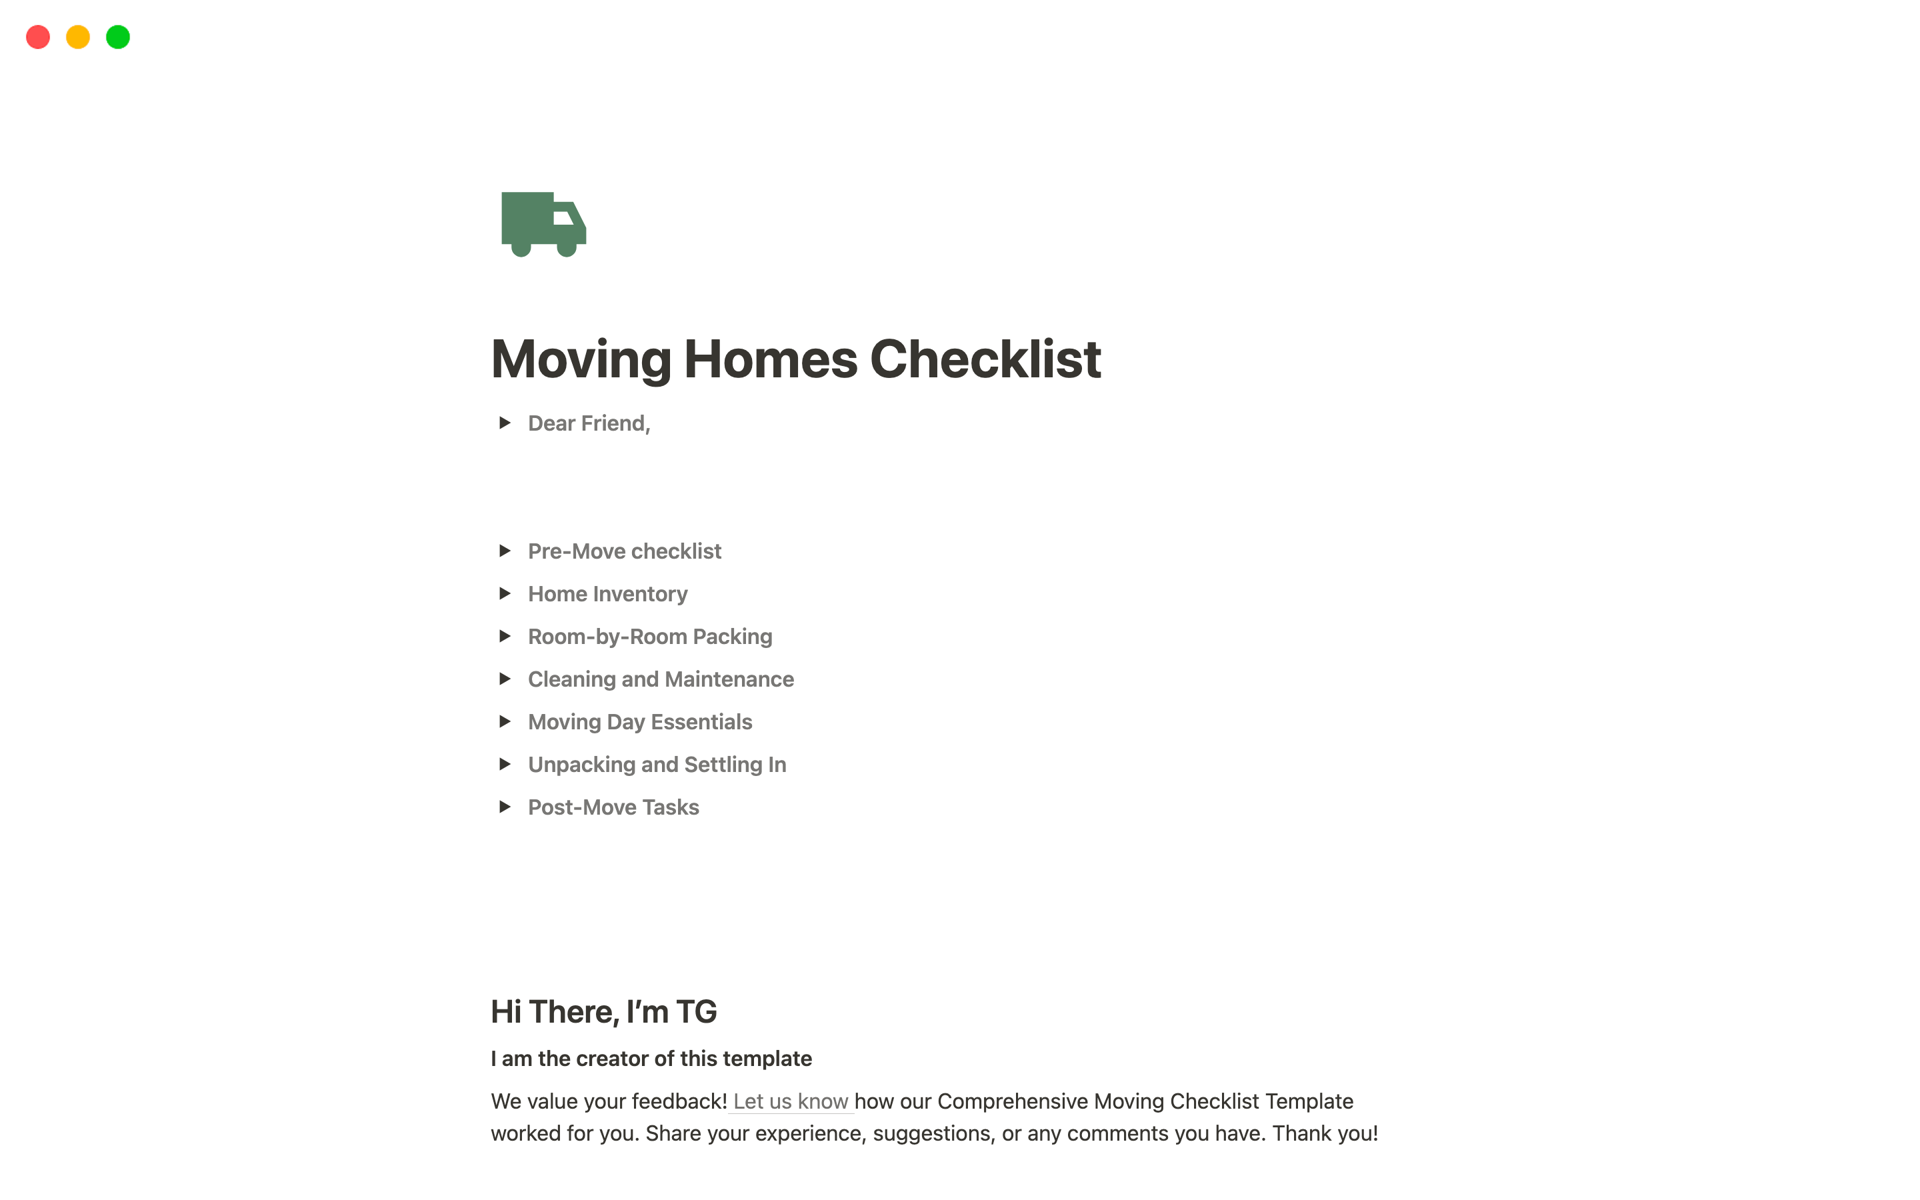 Streamline your move with our customizable Notion moving checklist template. From pre-move preparations to settling into your new home, stay organized and stress-free. Simplify the relocation process and make your move with confidence.